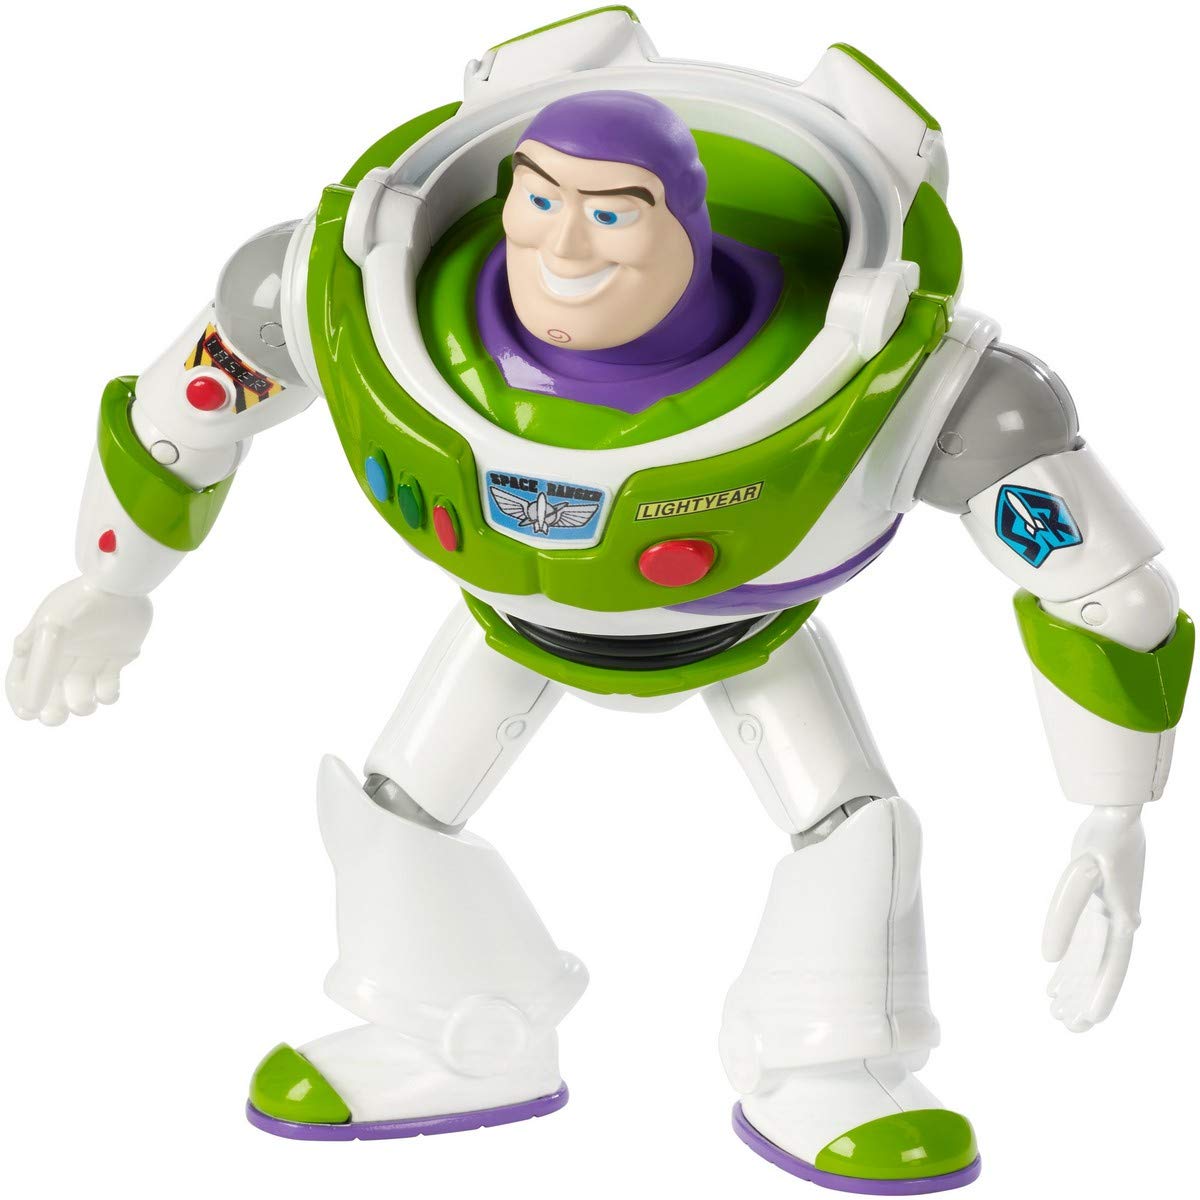 Mattel Ggx32 Toy Story 4 Buzz Lightyear Figure 17 Cm Toy Action Figure From